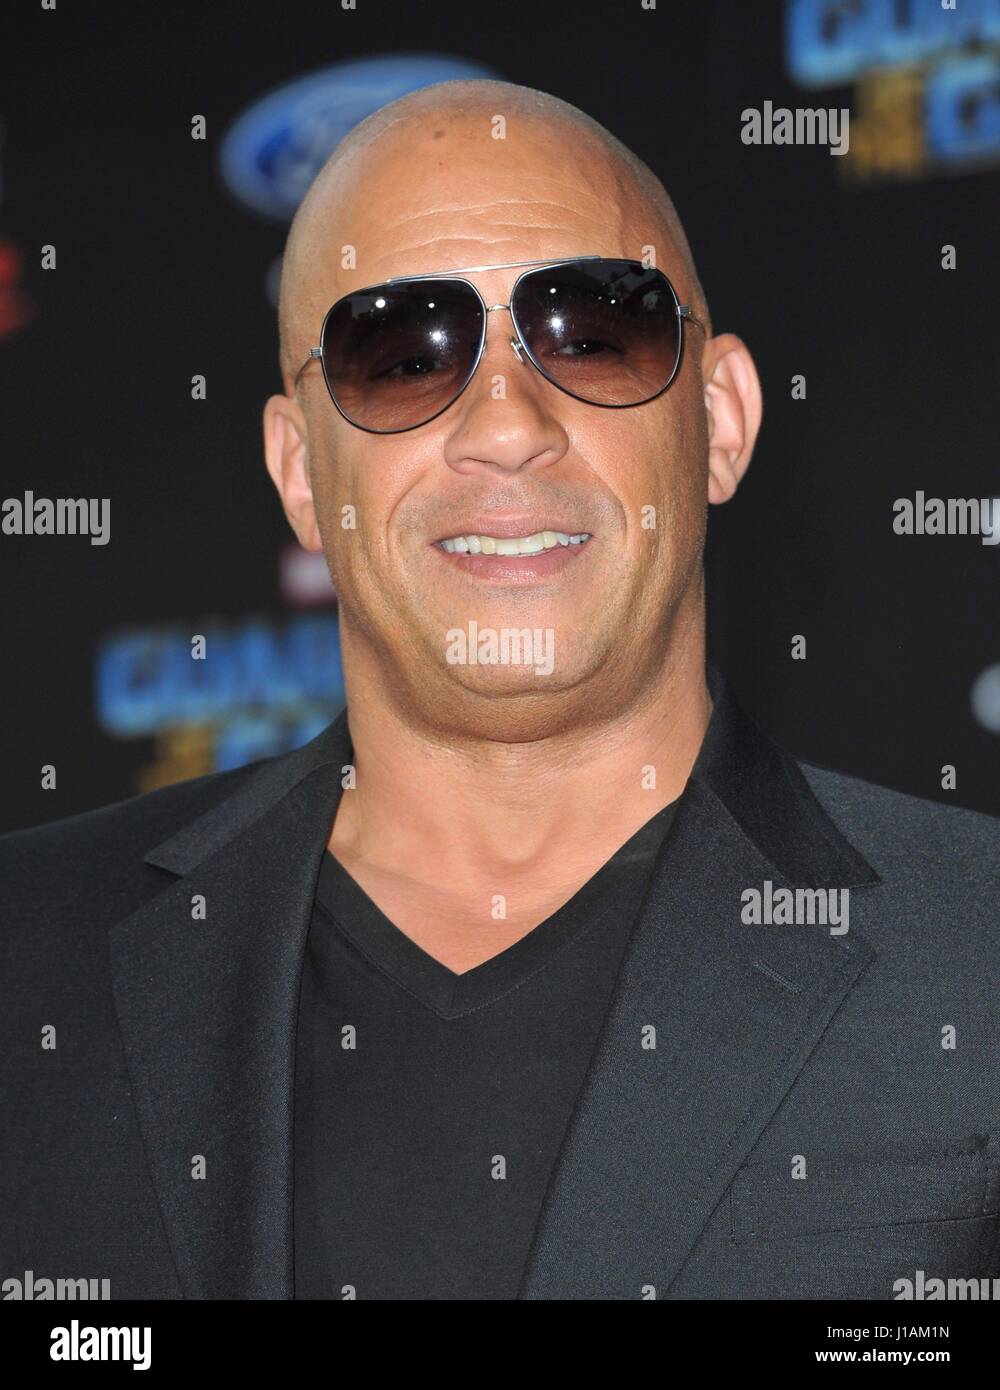 Los Angeles, CA, USA. 19th Apr, 2017. Vin Diesel at arrivals for GUARDIANS OF THE GALAXY VOL. 2 Premiere, The Dolby Theatre at Hollywood and Highland Center, Los Angeles, CA April 19, 2017. Credit: Elizabeth Goodenough/Everett Collection/Alamy Live News Stock Photo